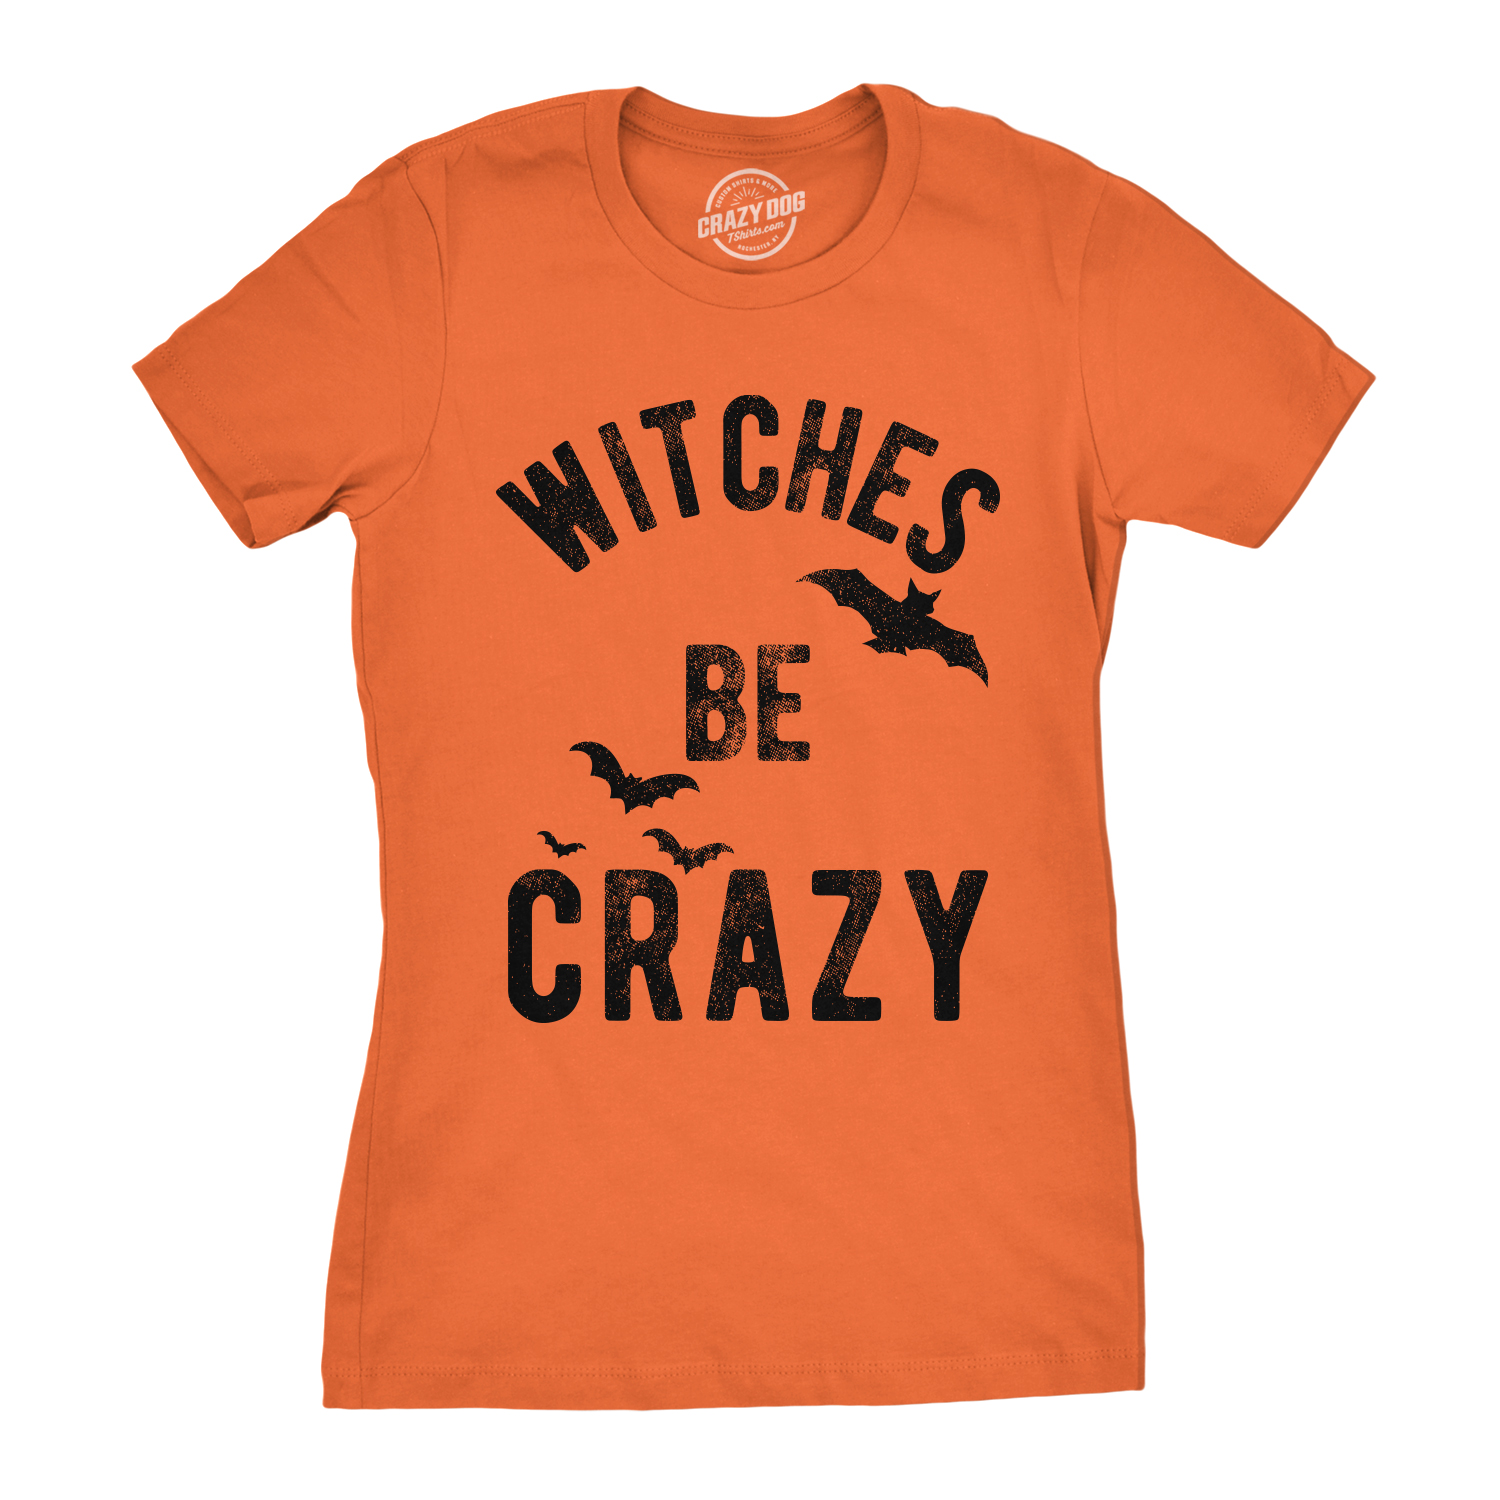 Womens Witches Be Crazy Tshirt Funny Party Tee For Ladies Womens Graphic Tees - image 1 of 9